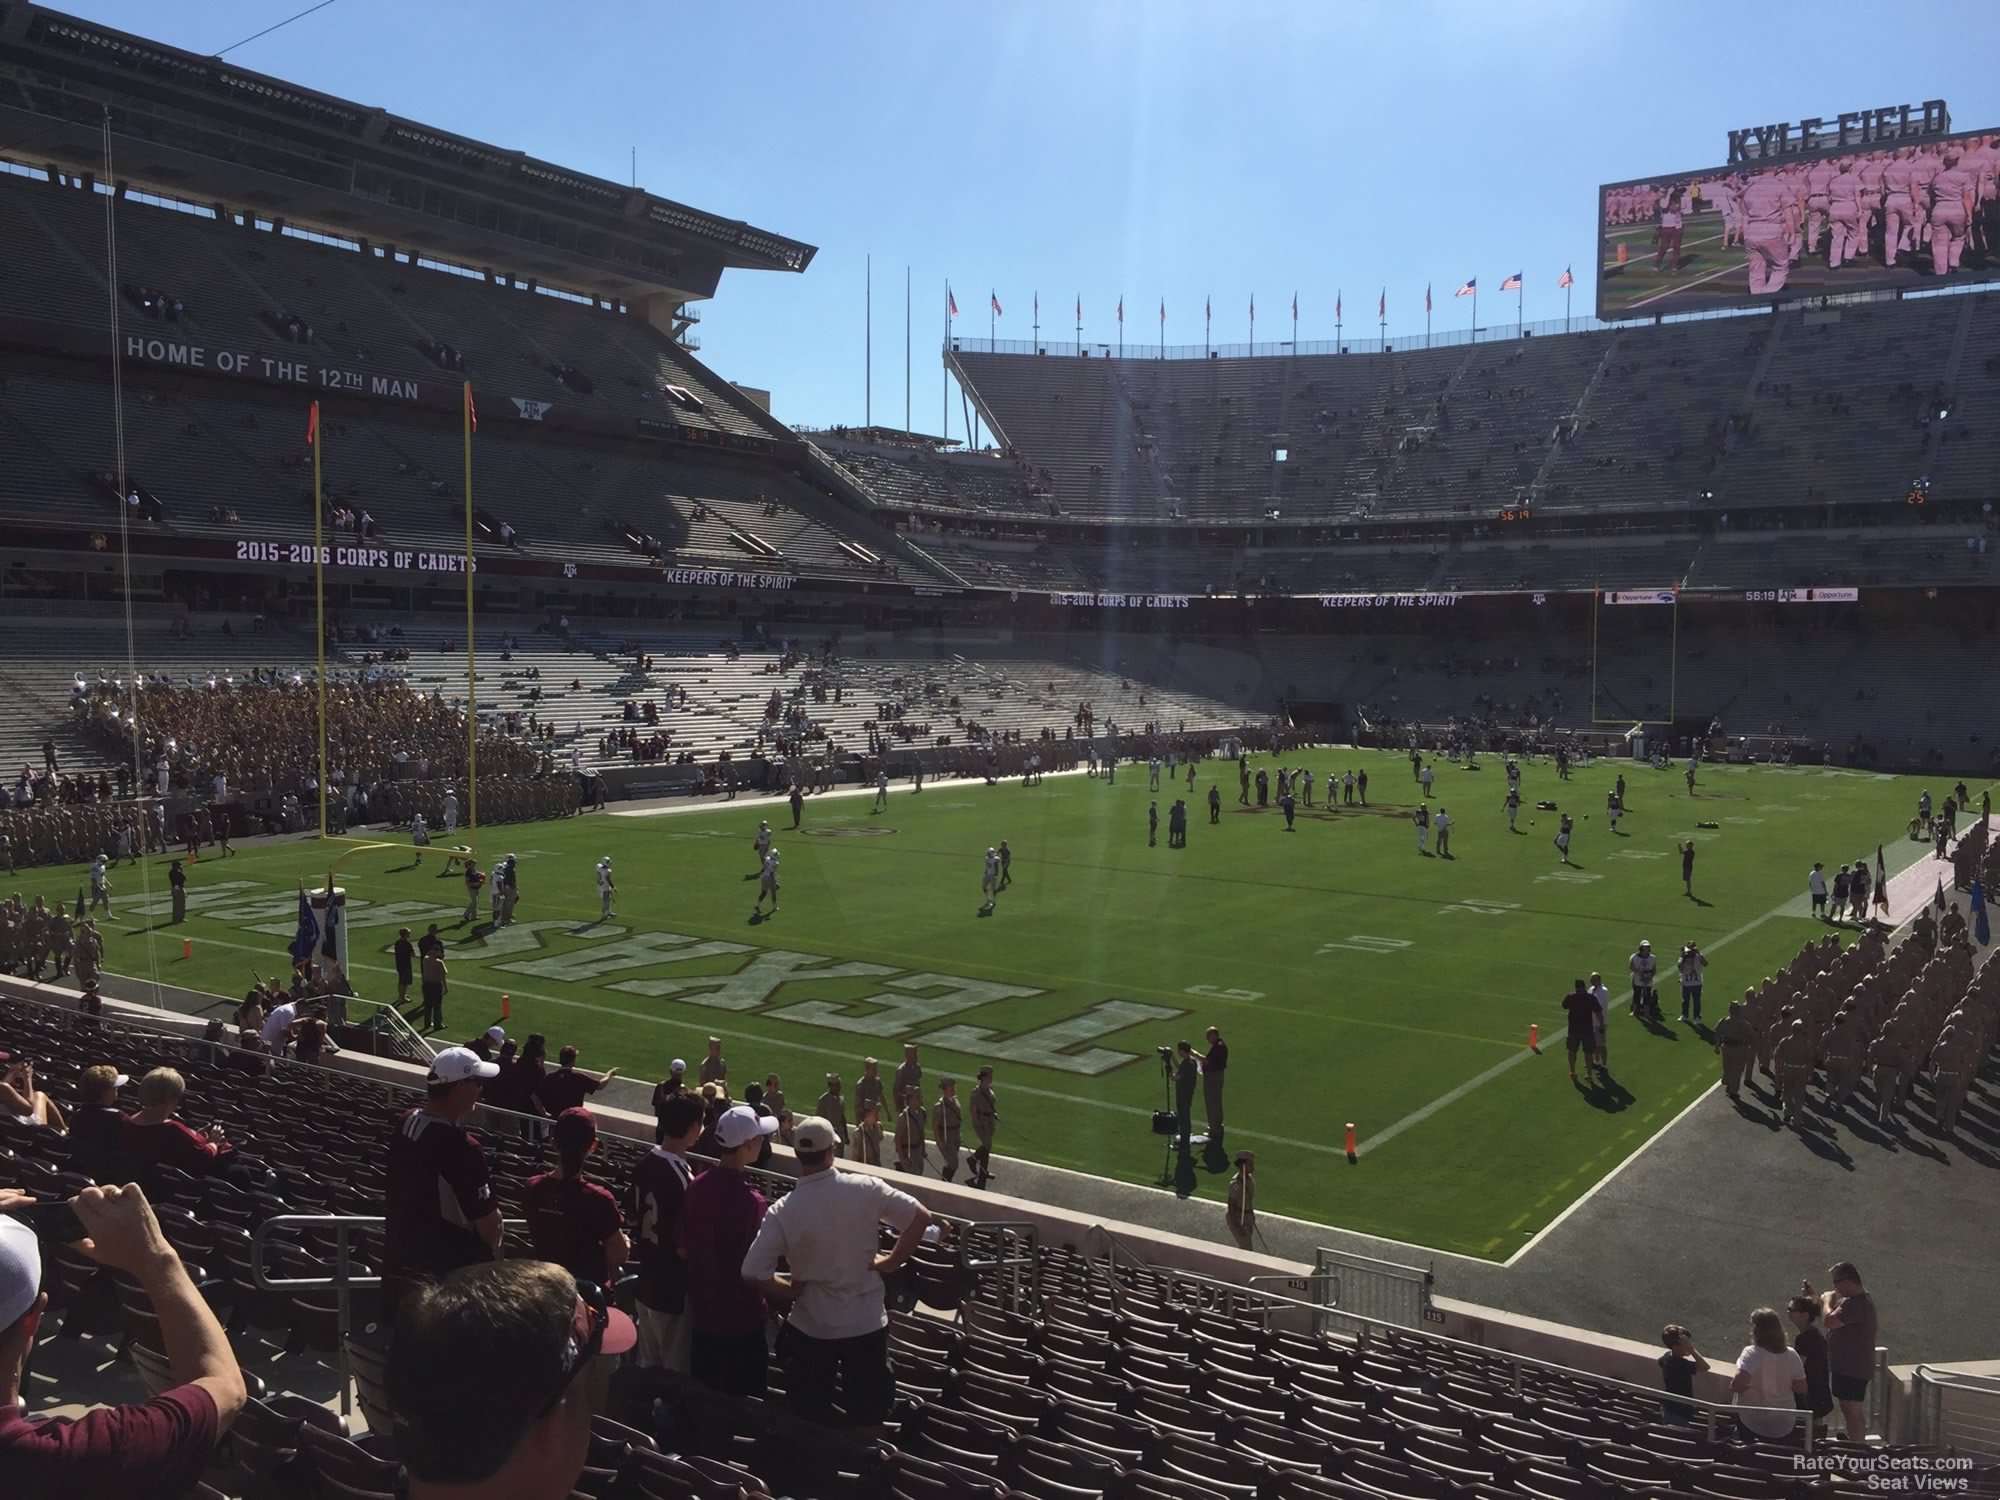 section 115, row 20 seat view  - kyle field